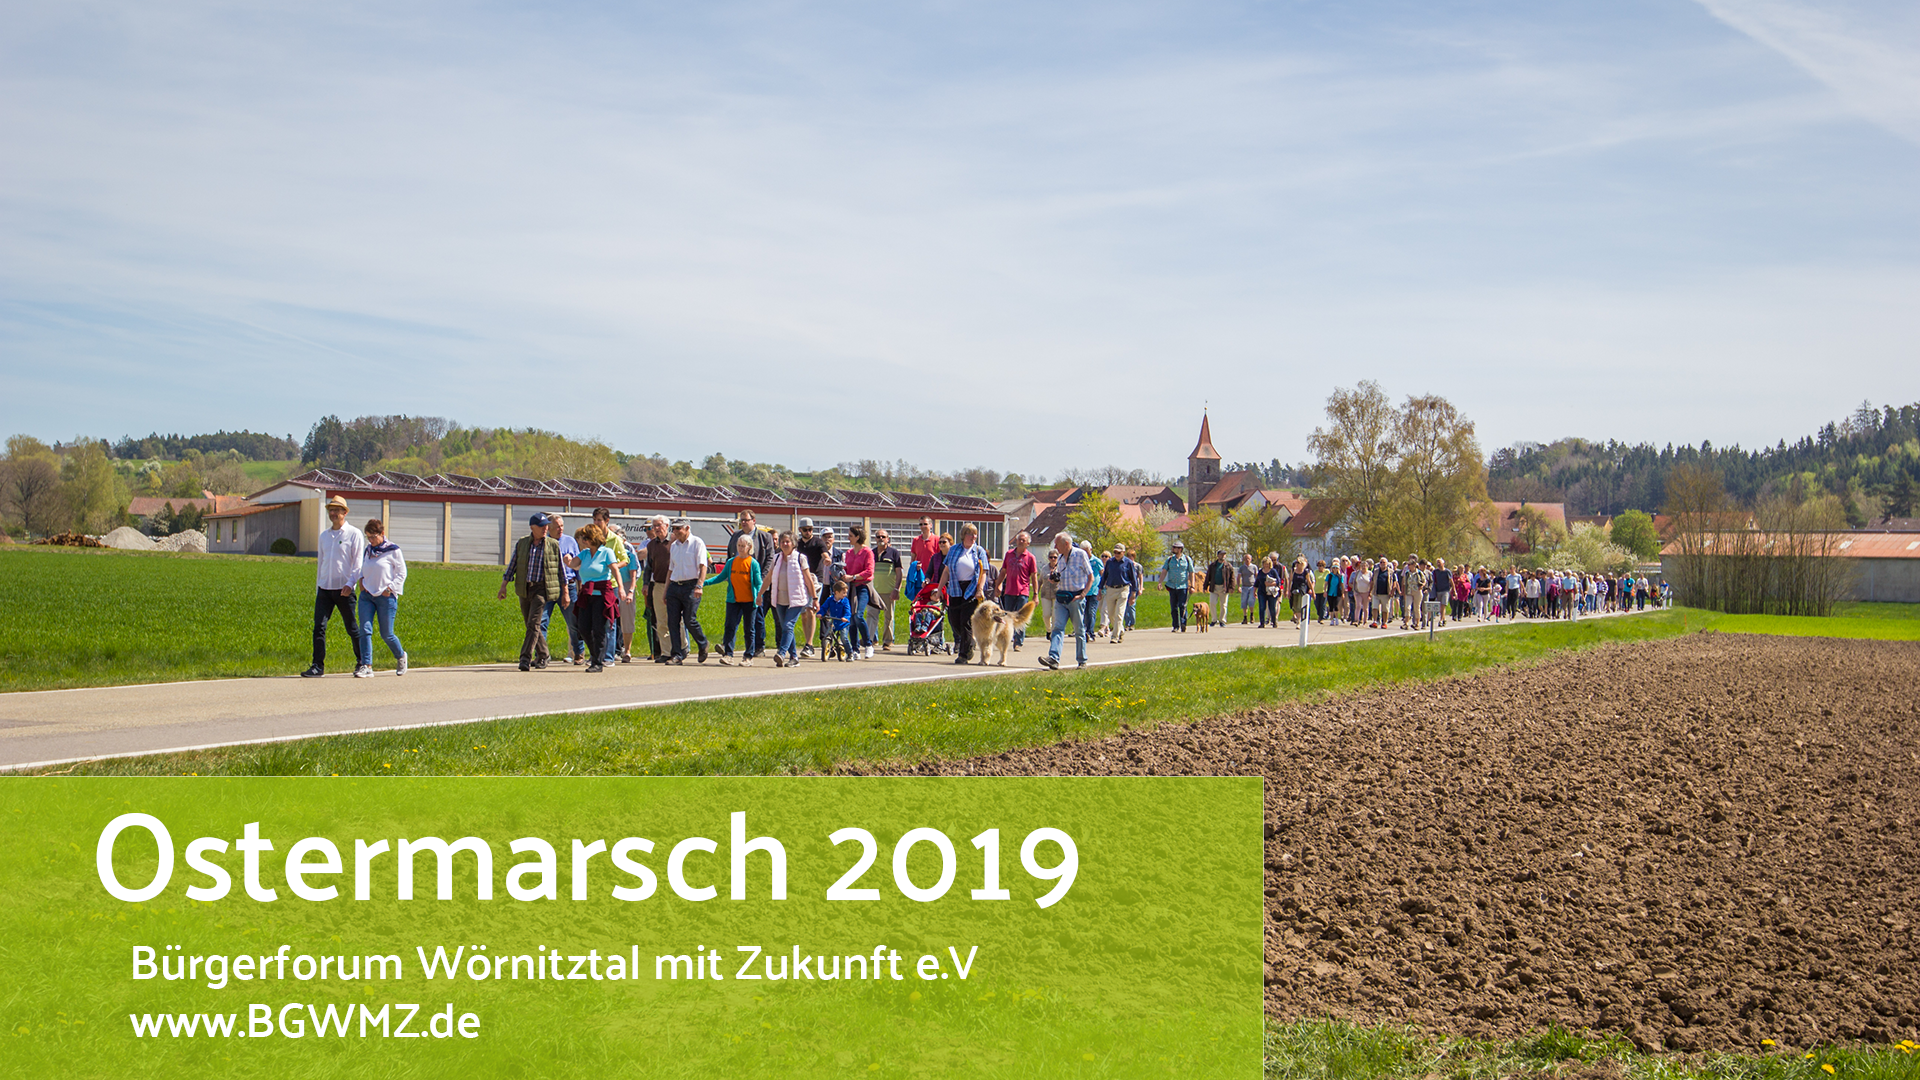 You are currently viewing Ostermarsch 2019